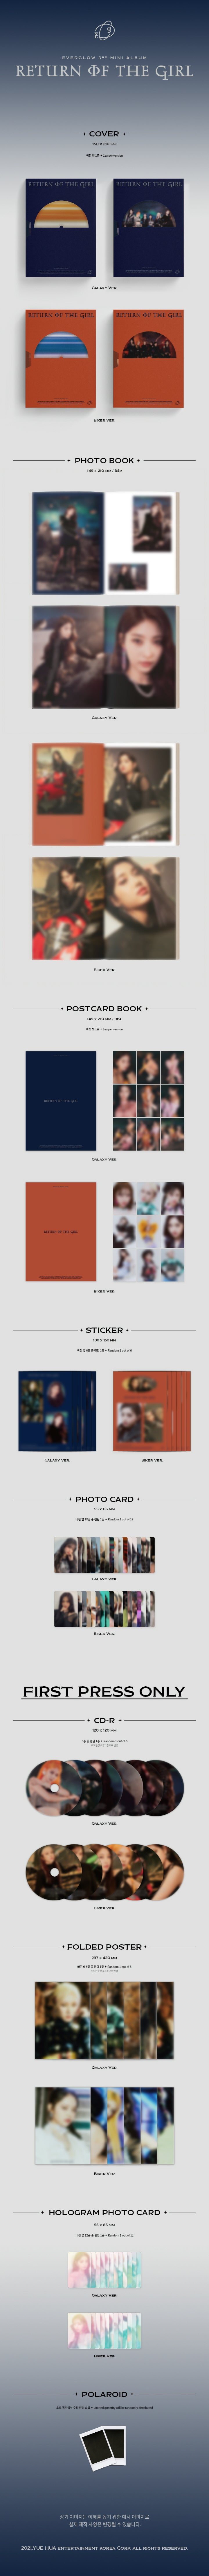 1 Photo Book (84 pages)
1 Postcard Book (random out of 9 types)
1 Sticker (random out of 6 types per version)
1 Photo Card...